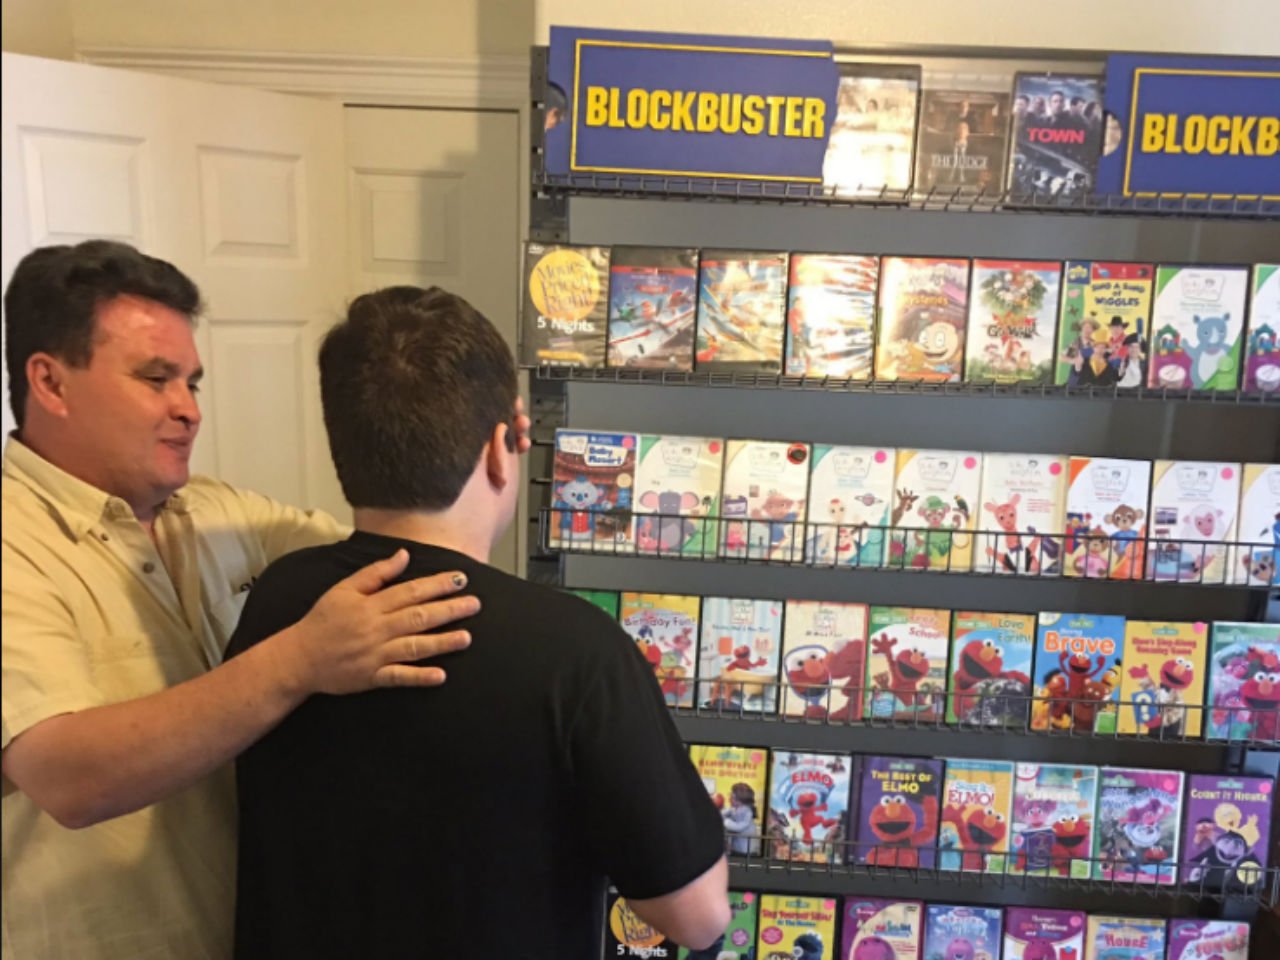 blockbusters fan with autism built a blockbusters in their home after it was closed down